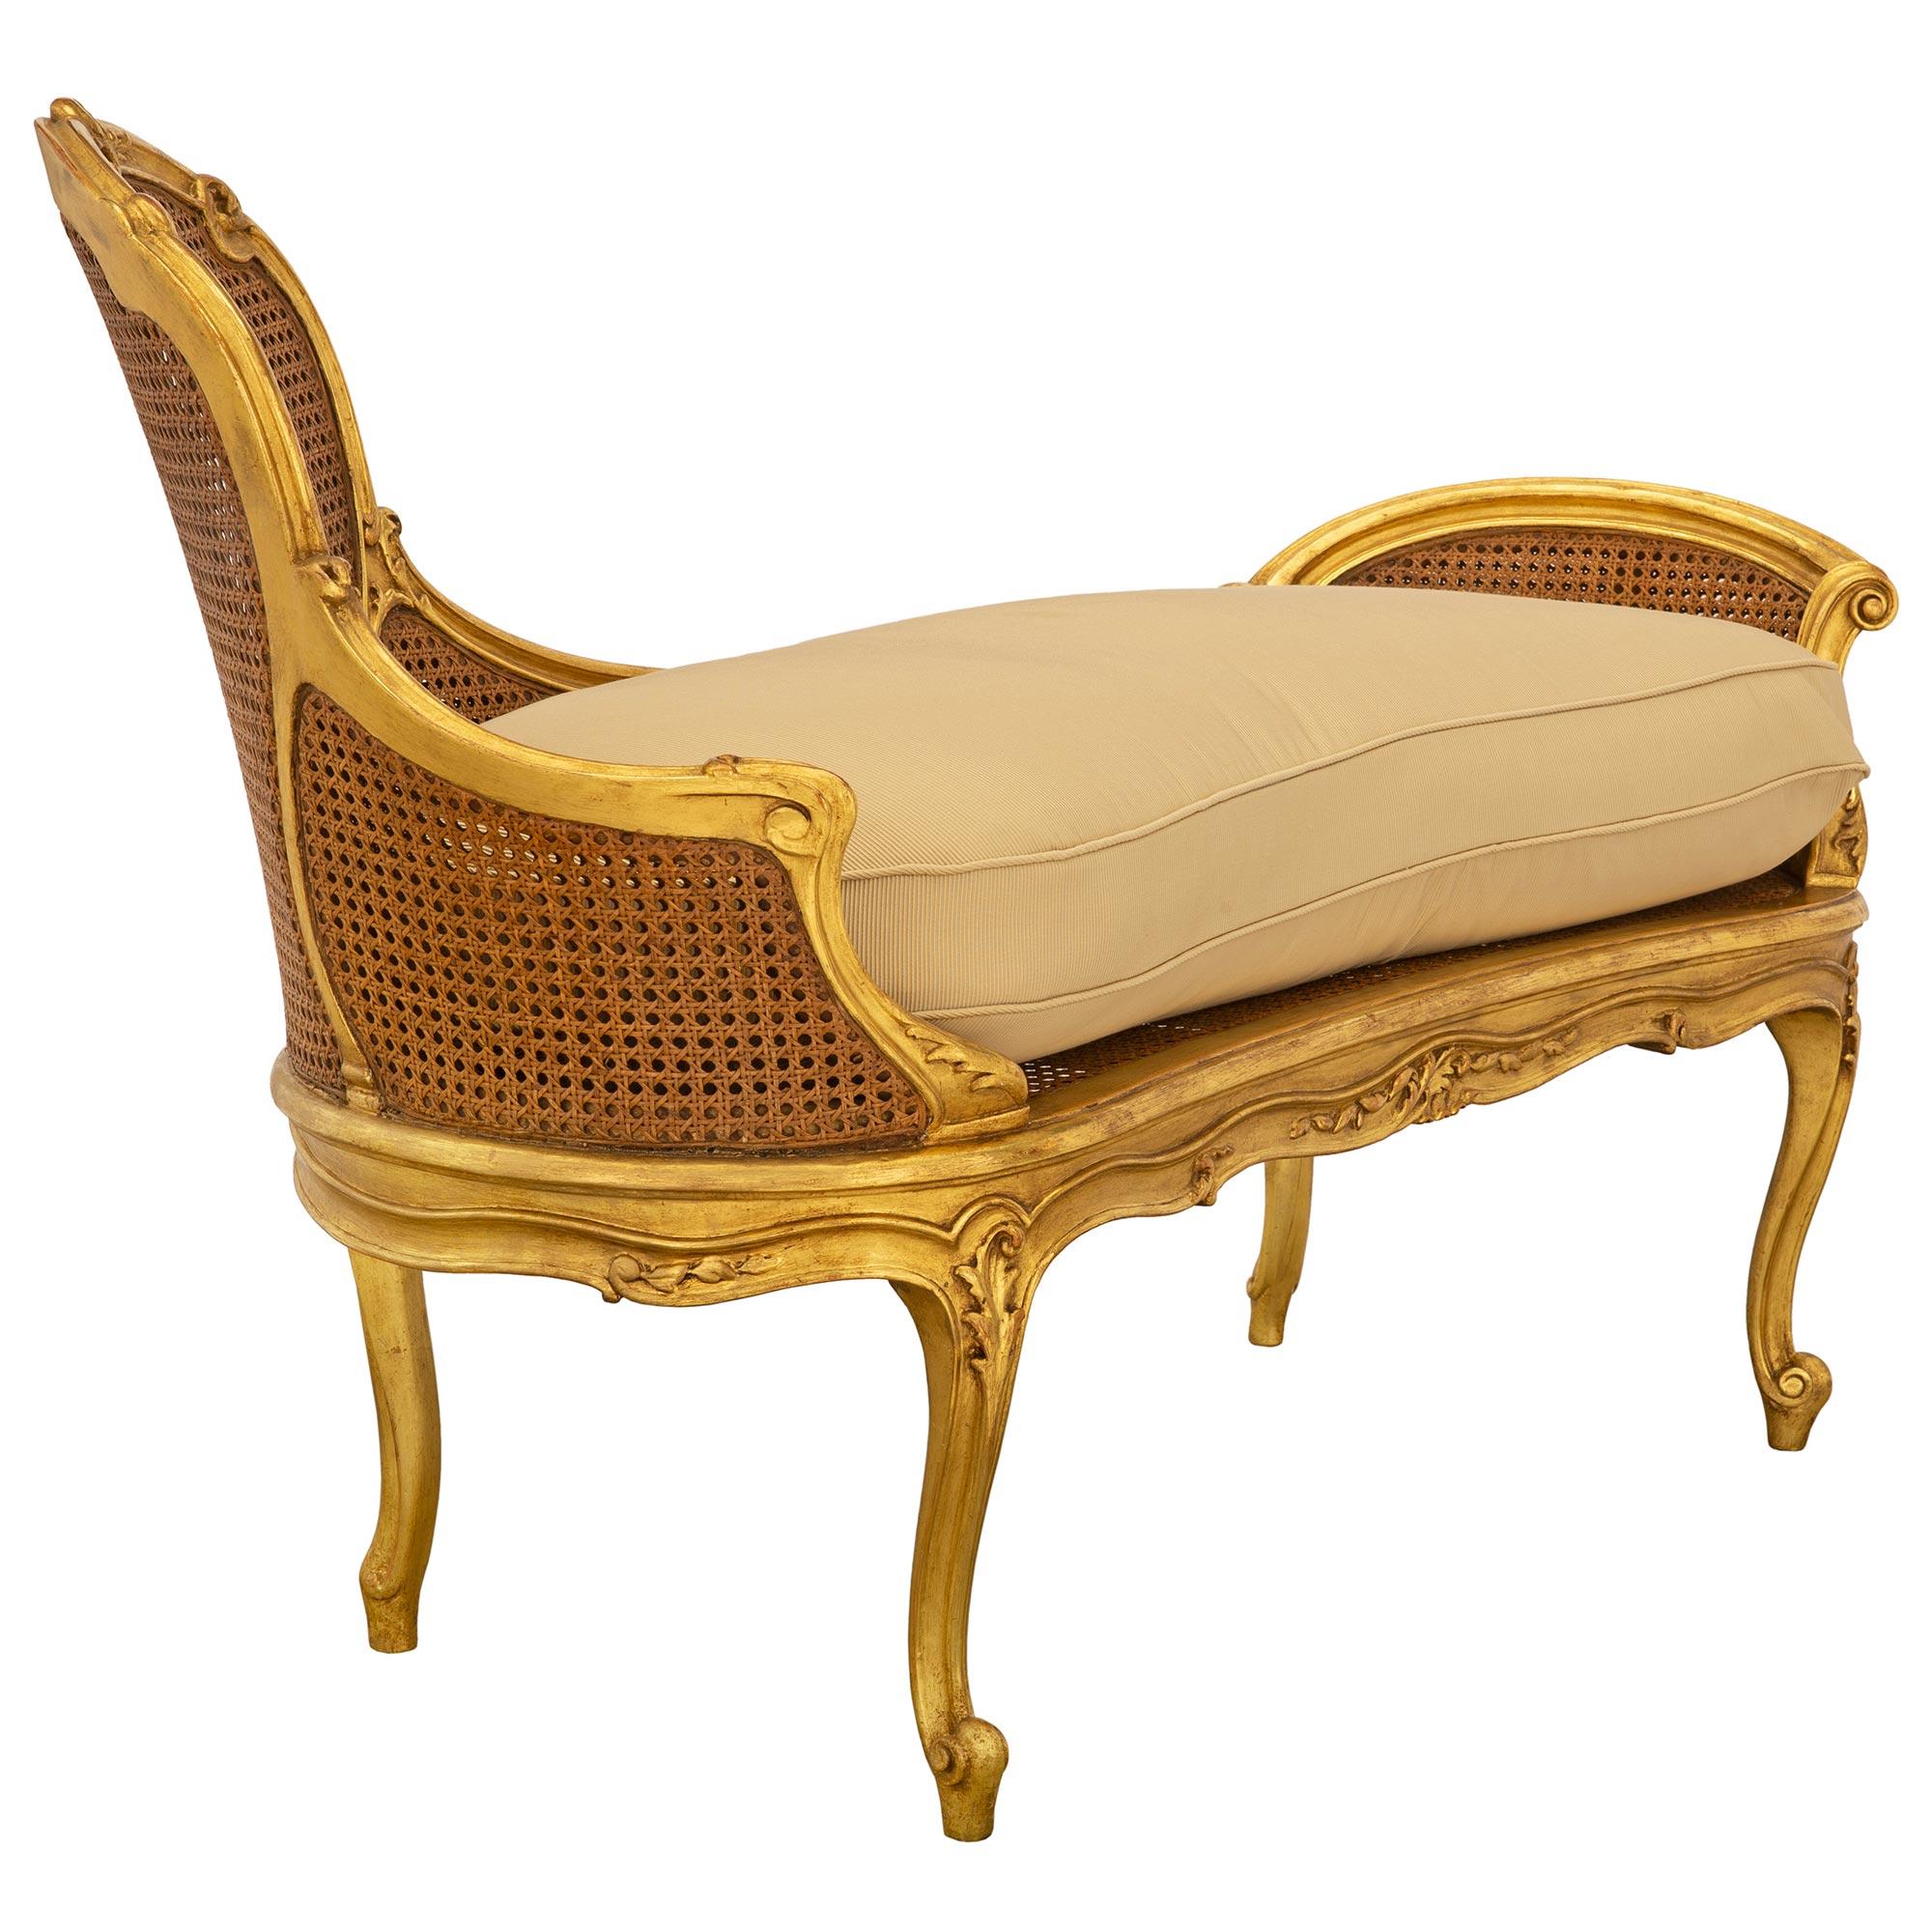 A beautiful and most unique French 19th century Louis XV st. giltwood settee. The small scale settee is raised by elegant slender cabriole legs with fine scrolled feet, corner acanthus leaf carvings, and lovely mottled fillets which extend up each